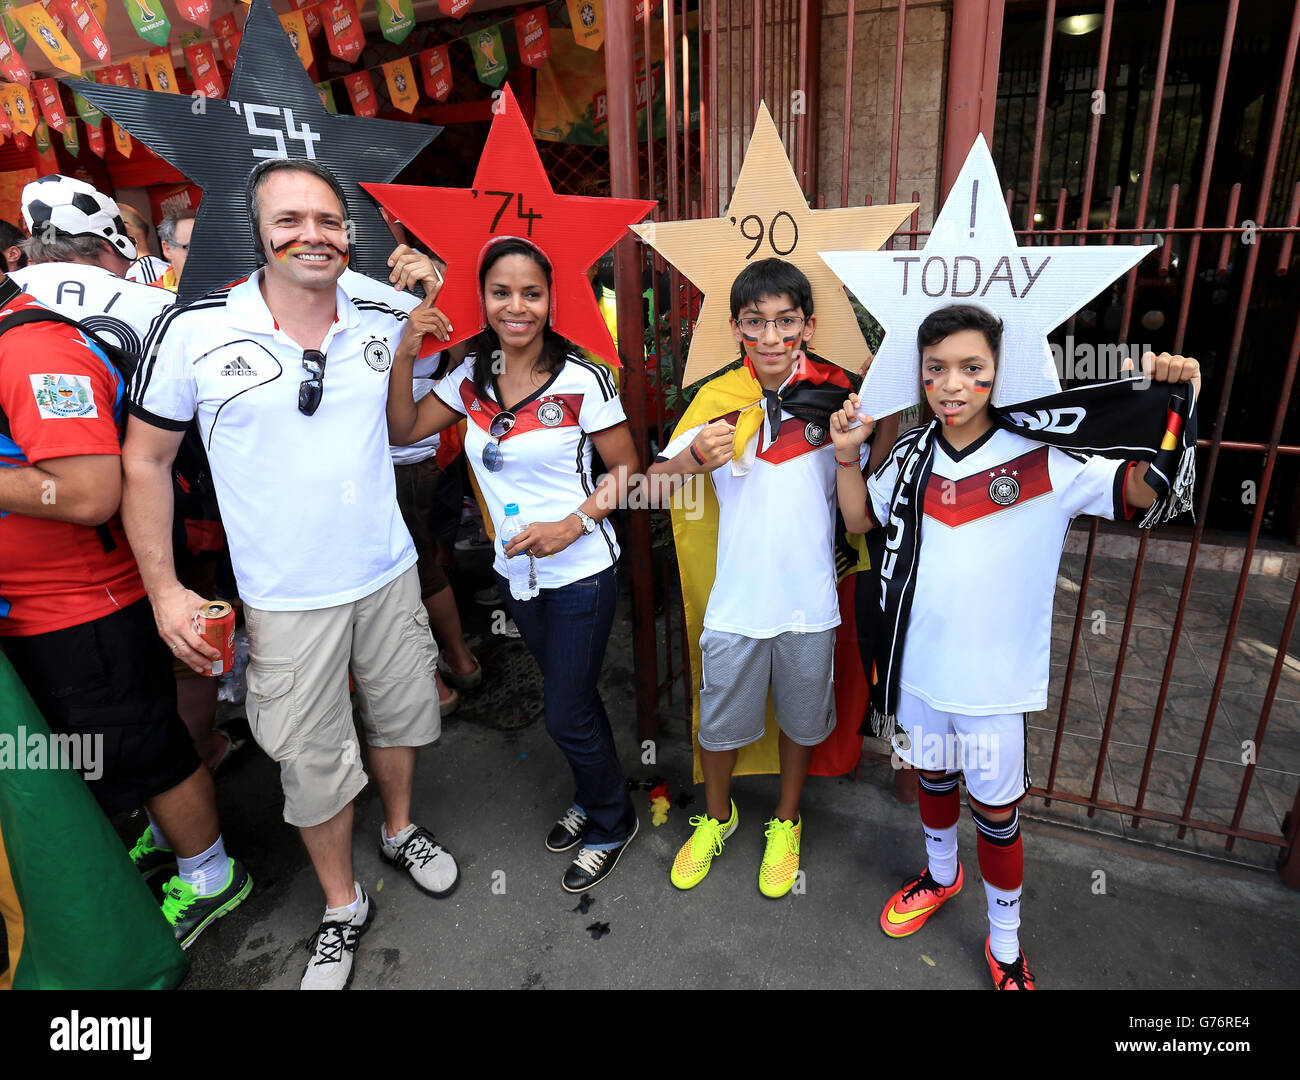 Soccer - FIFA World Cup 2014 - Final - Germany v Argentina - Estadio do Maracana. Germany fans in the streets show support for their team before the FIFA World Cup Final at the Estadio do Maracana, Rio de Janerio, Brazil. Stock Photo